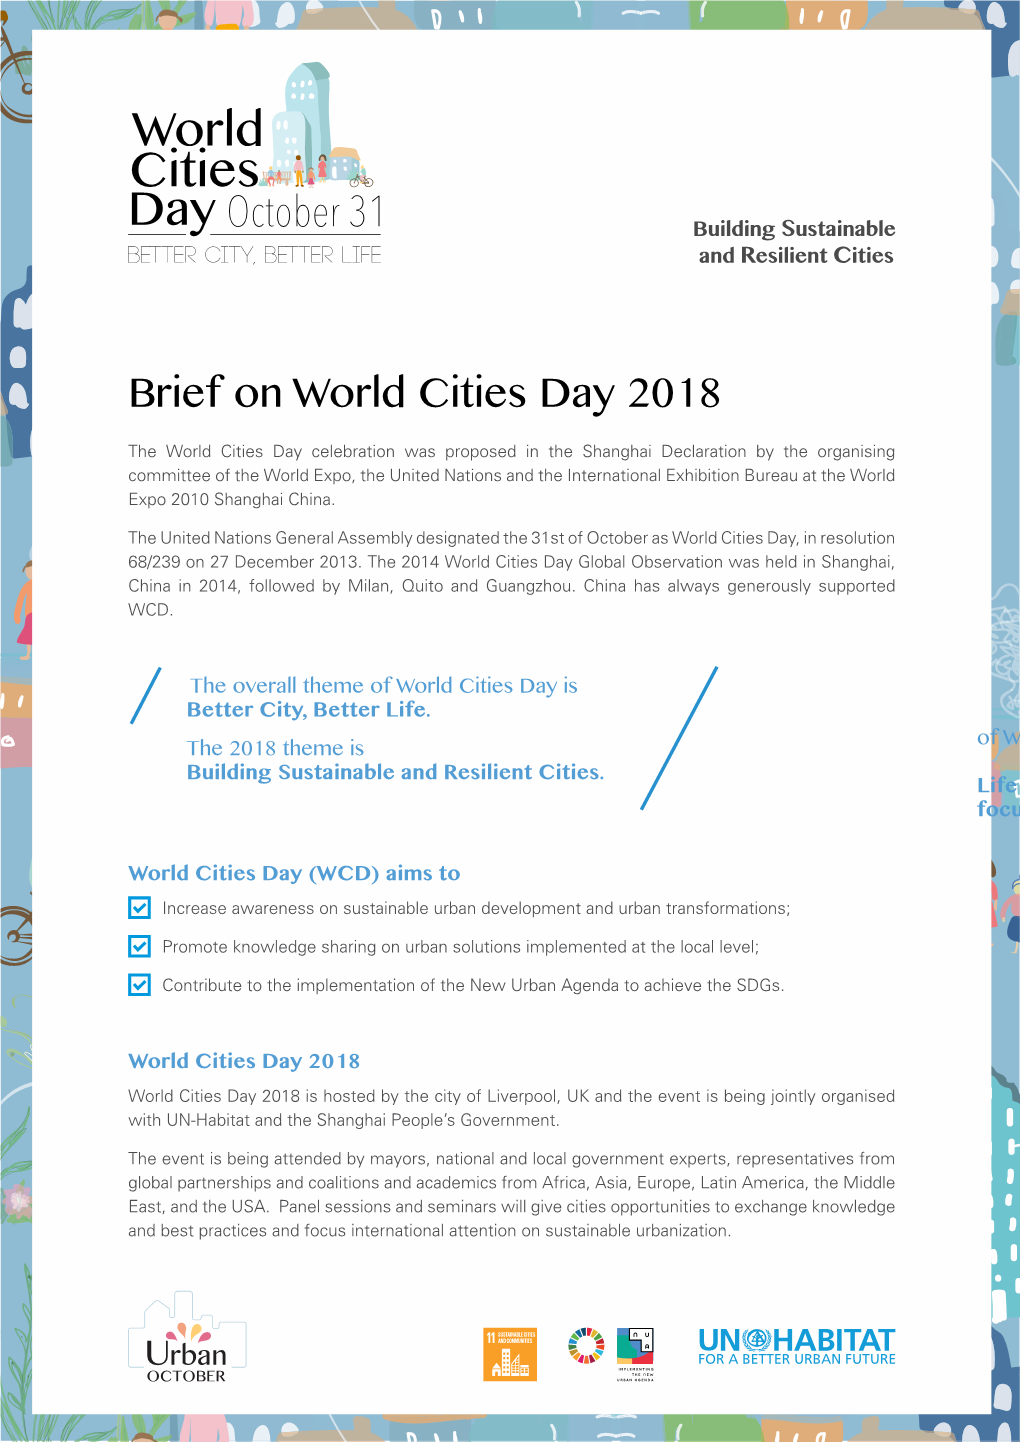 Brief on World Cities Day 2018